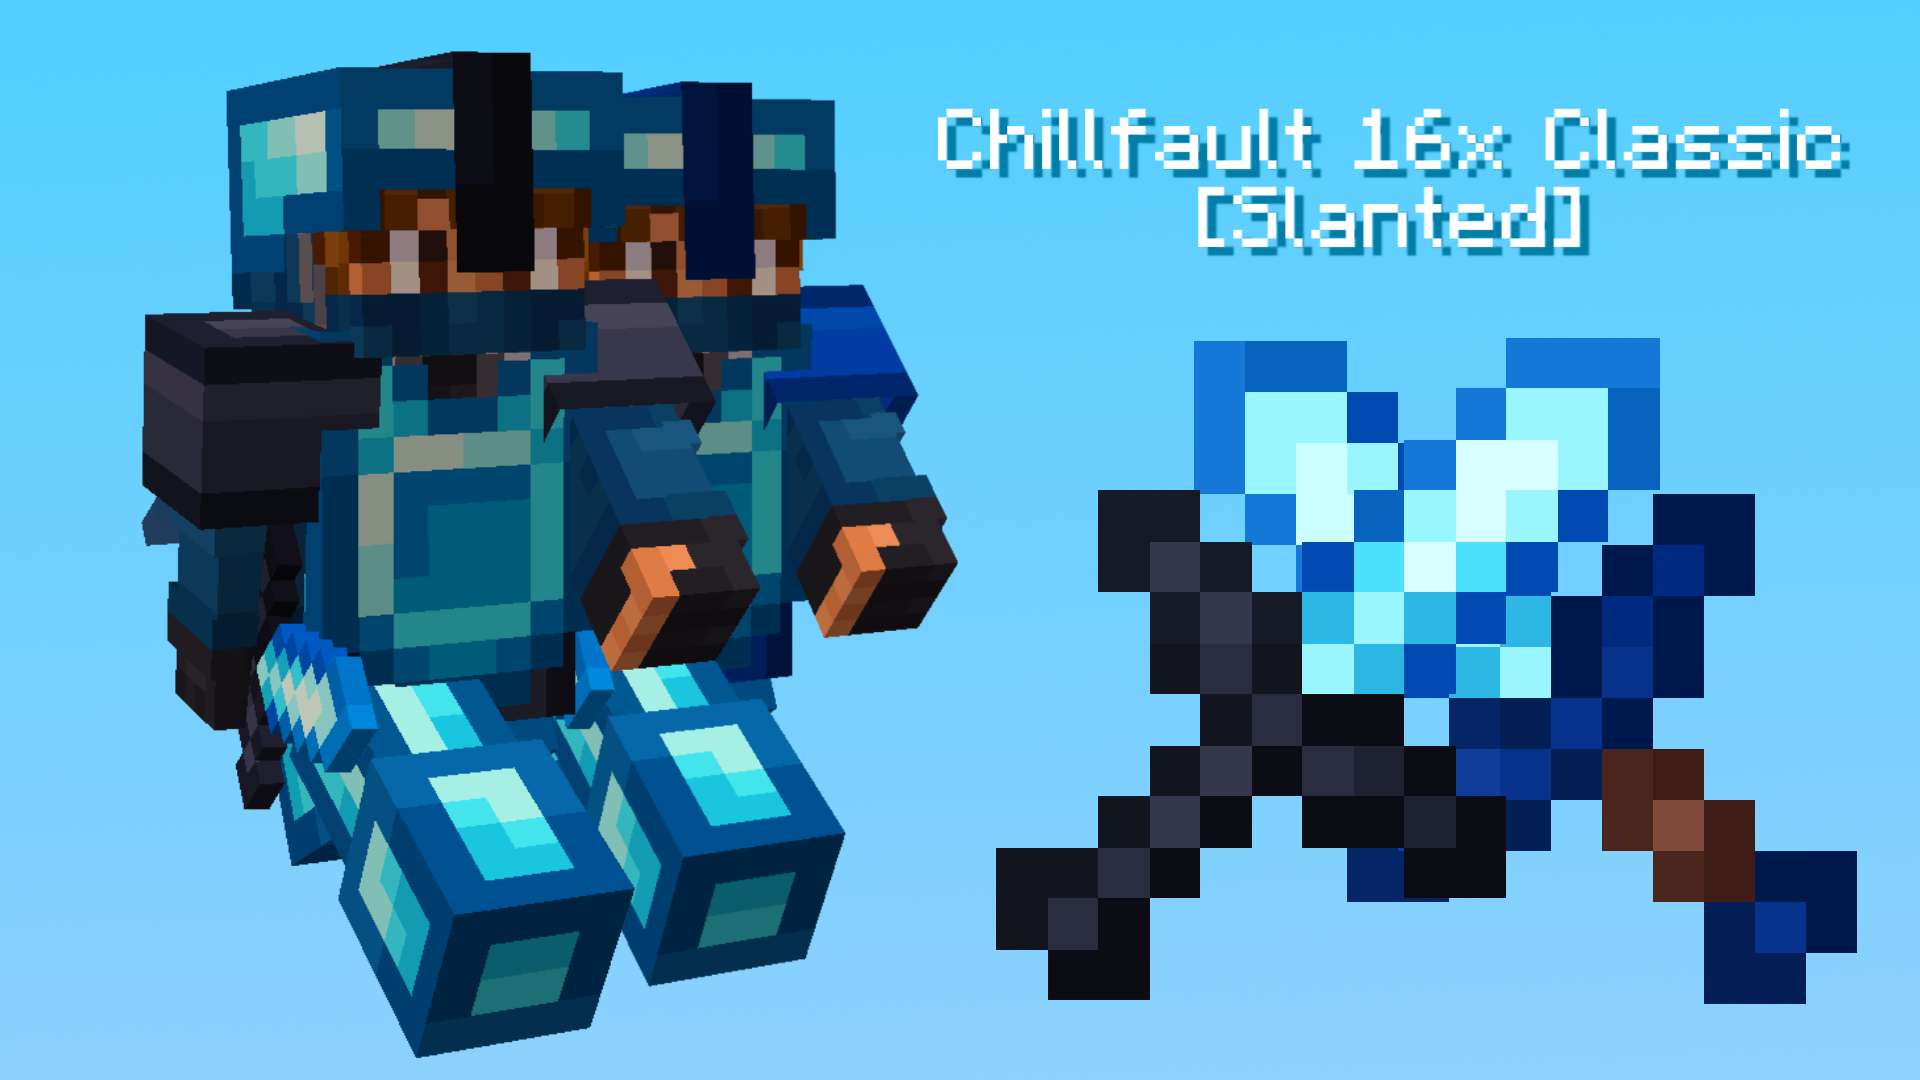 Chillfault  Classic [Slanted] 16x by Jes13 on PvPRP